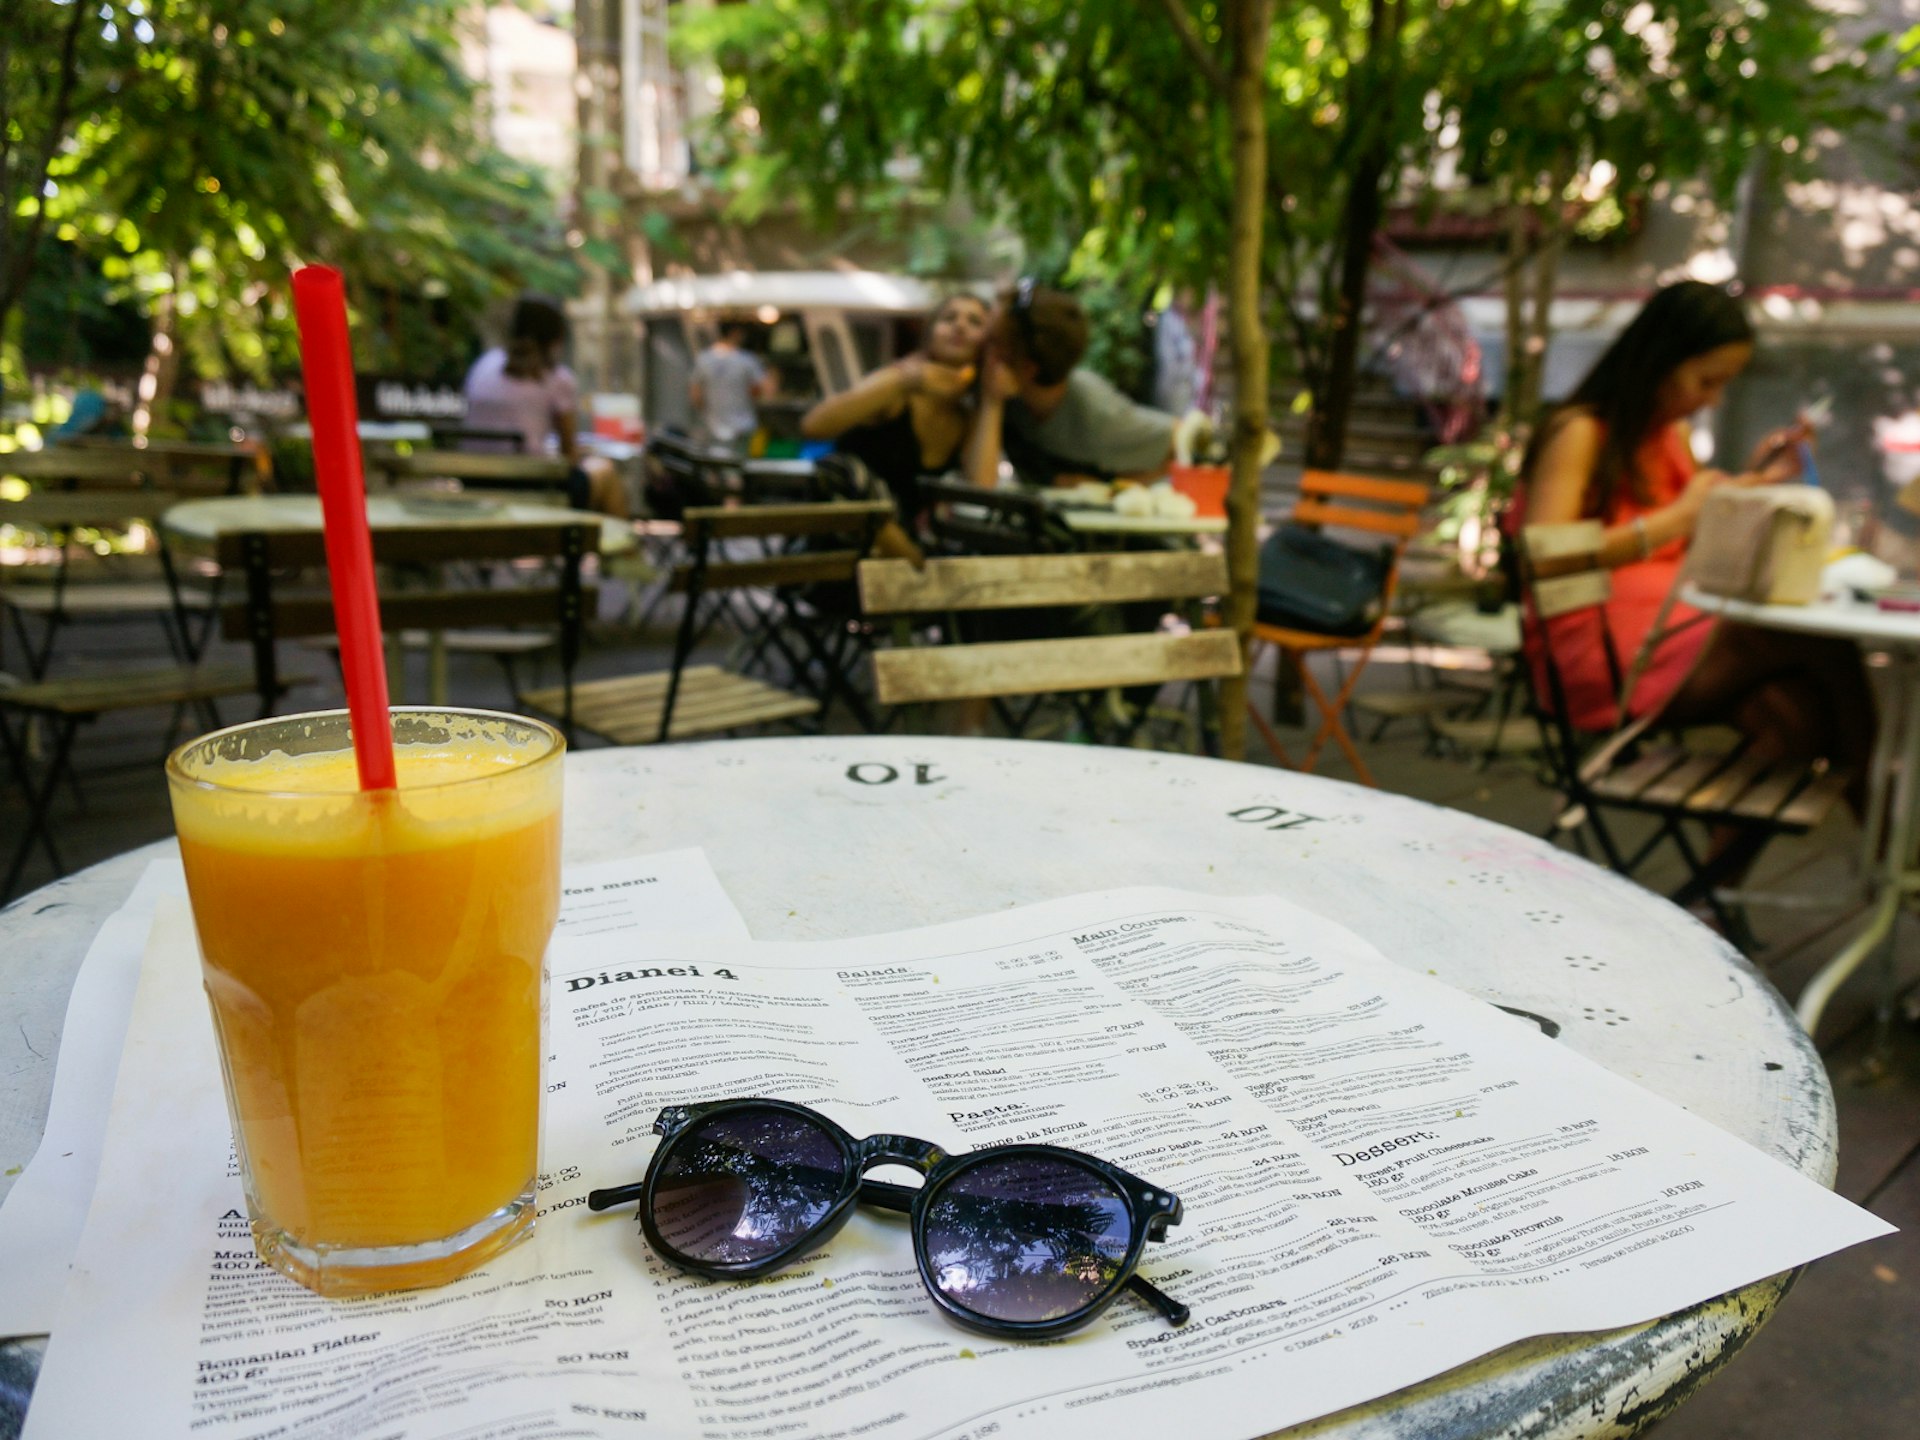 Chilling out at Dinaei 4, one of Bucharest's bohemian garden bars © Monica Suma / Lonely Planet